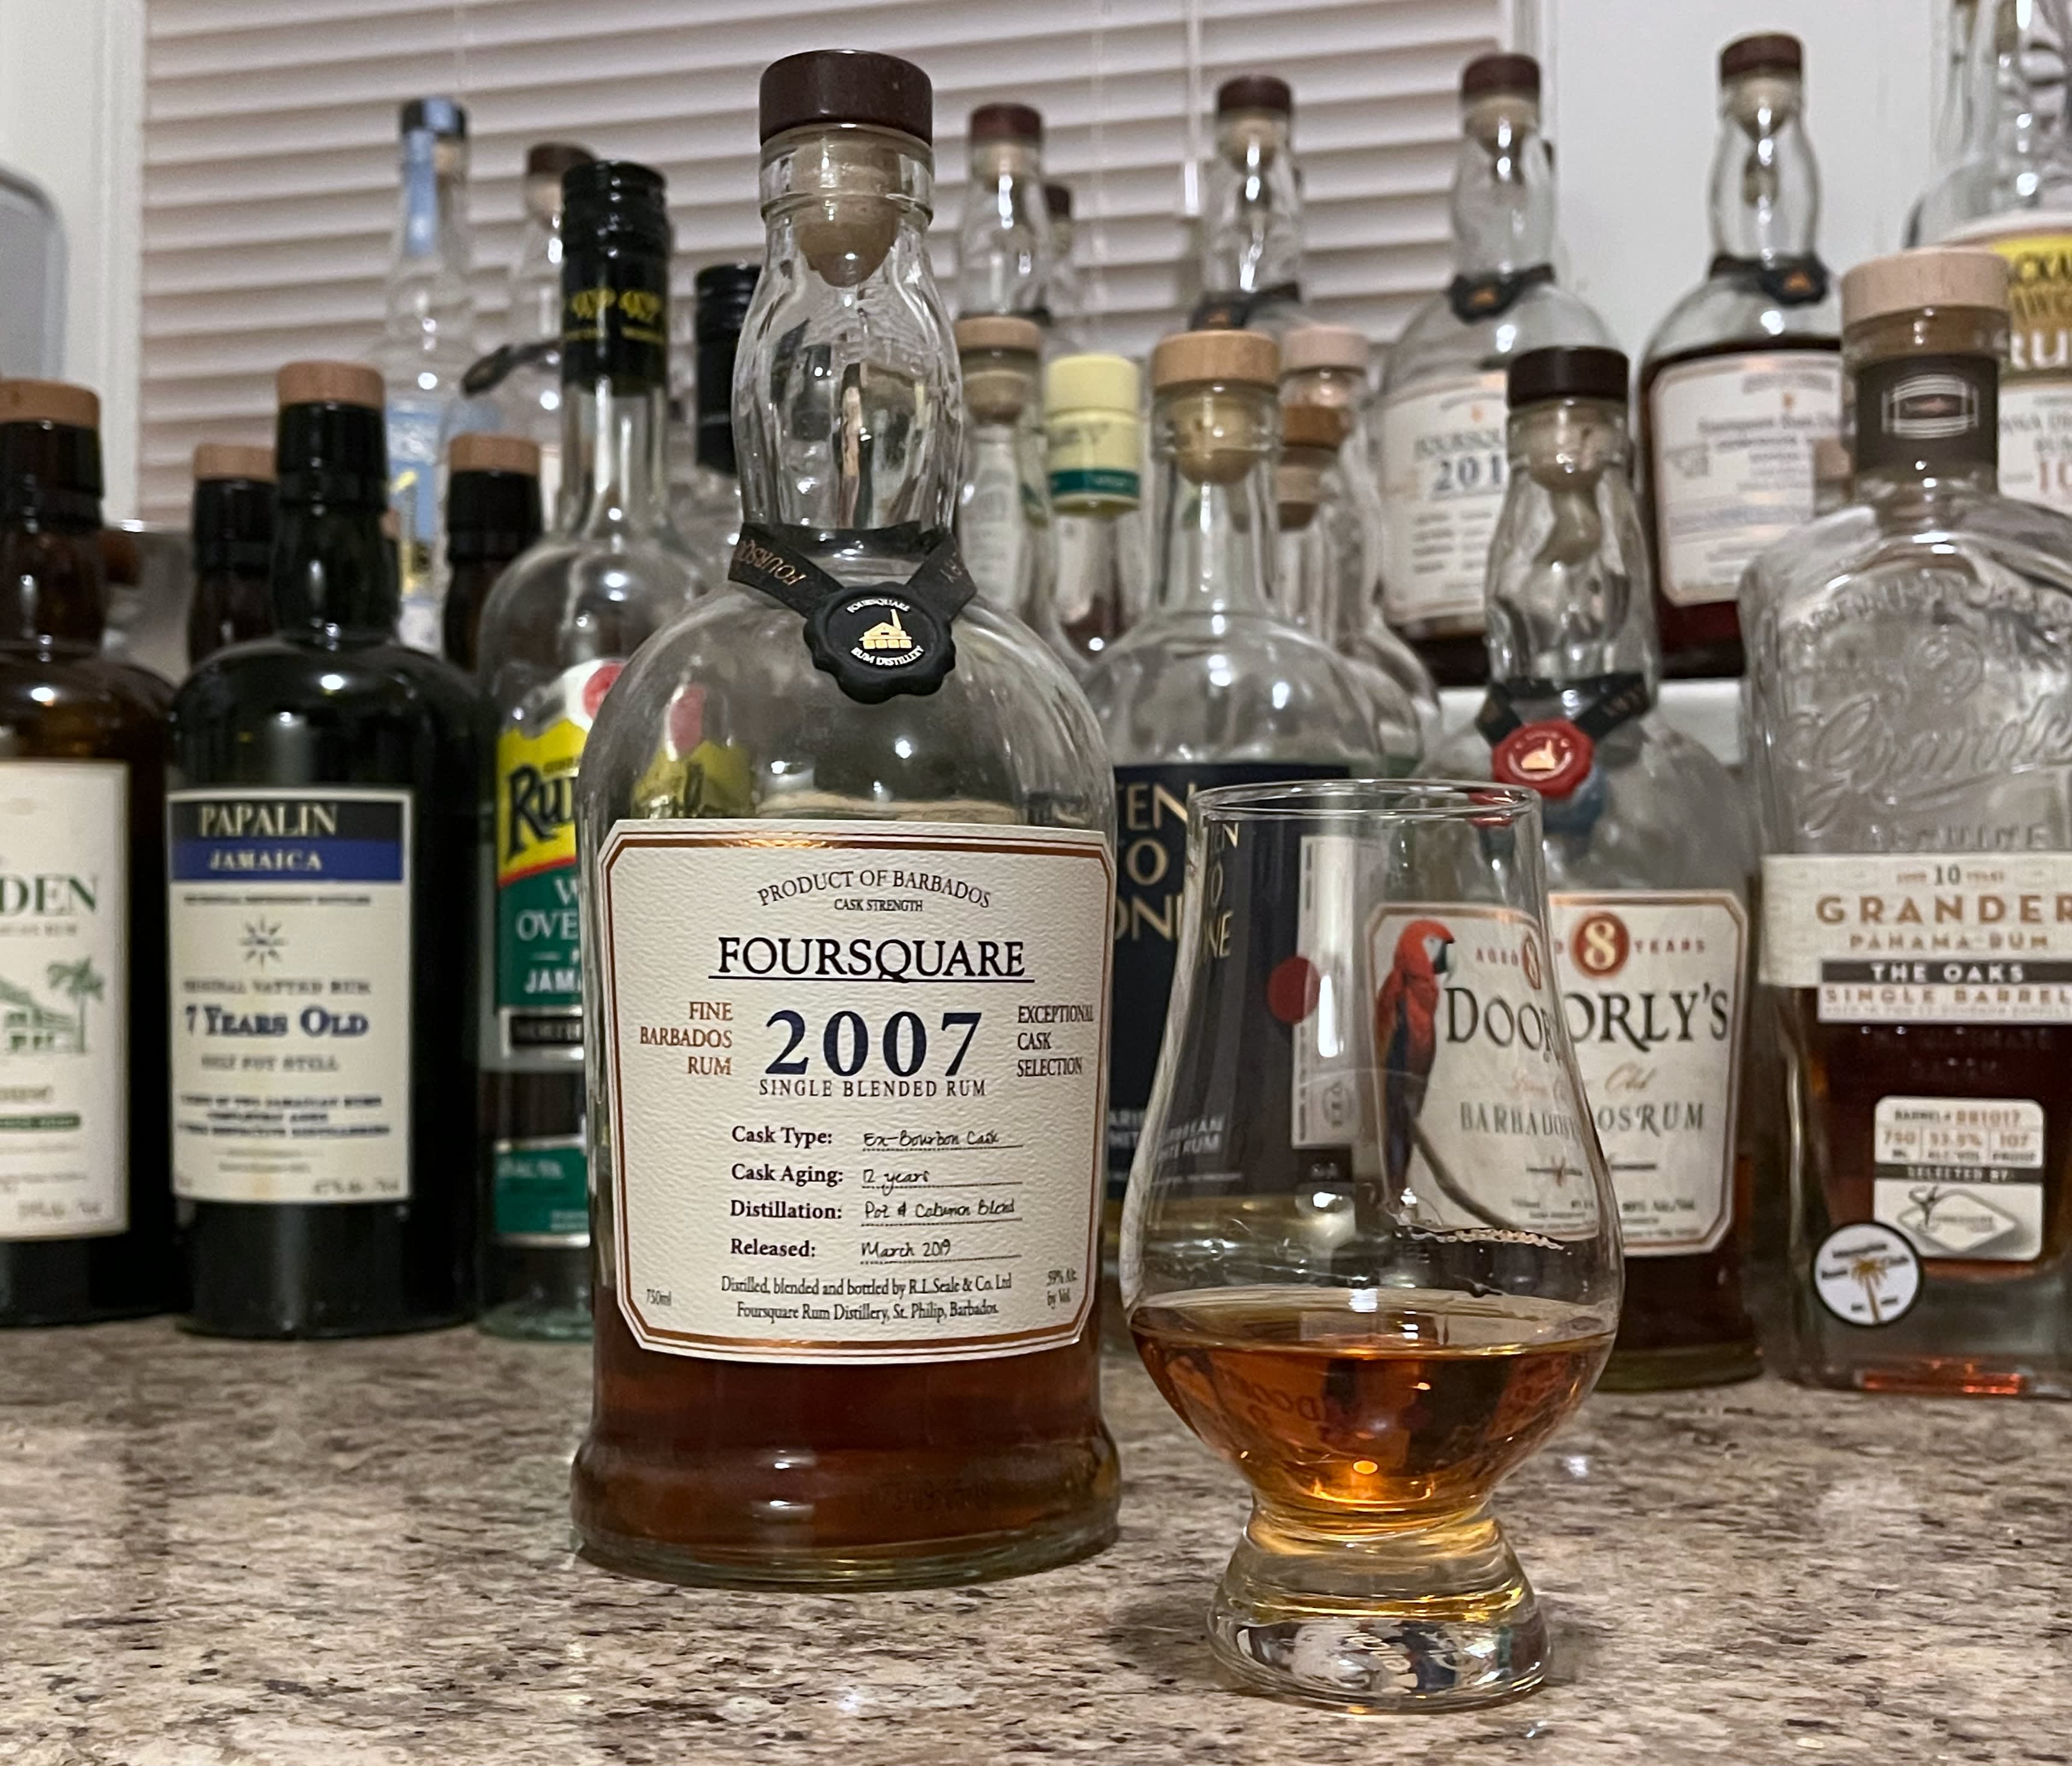 A bottle of Foursquare 2007 next to a glencairn of rum on a kitchen counter